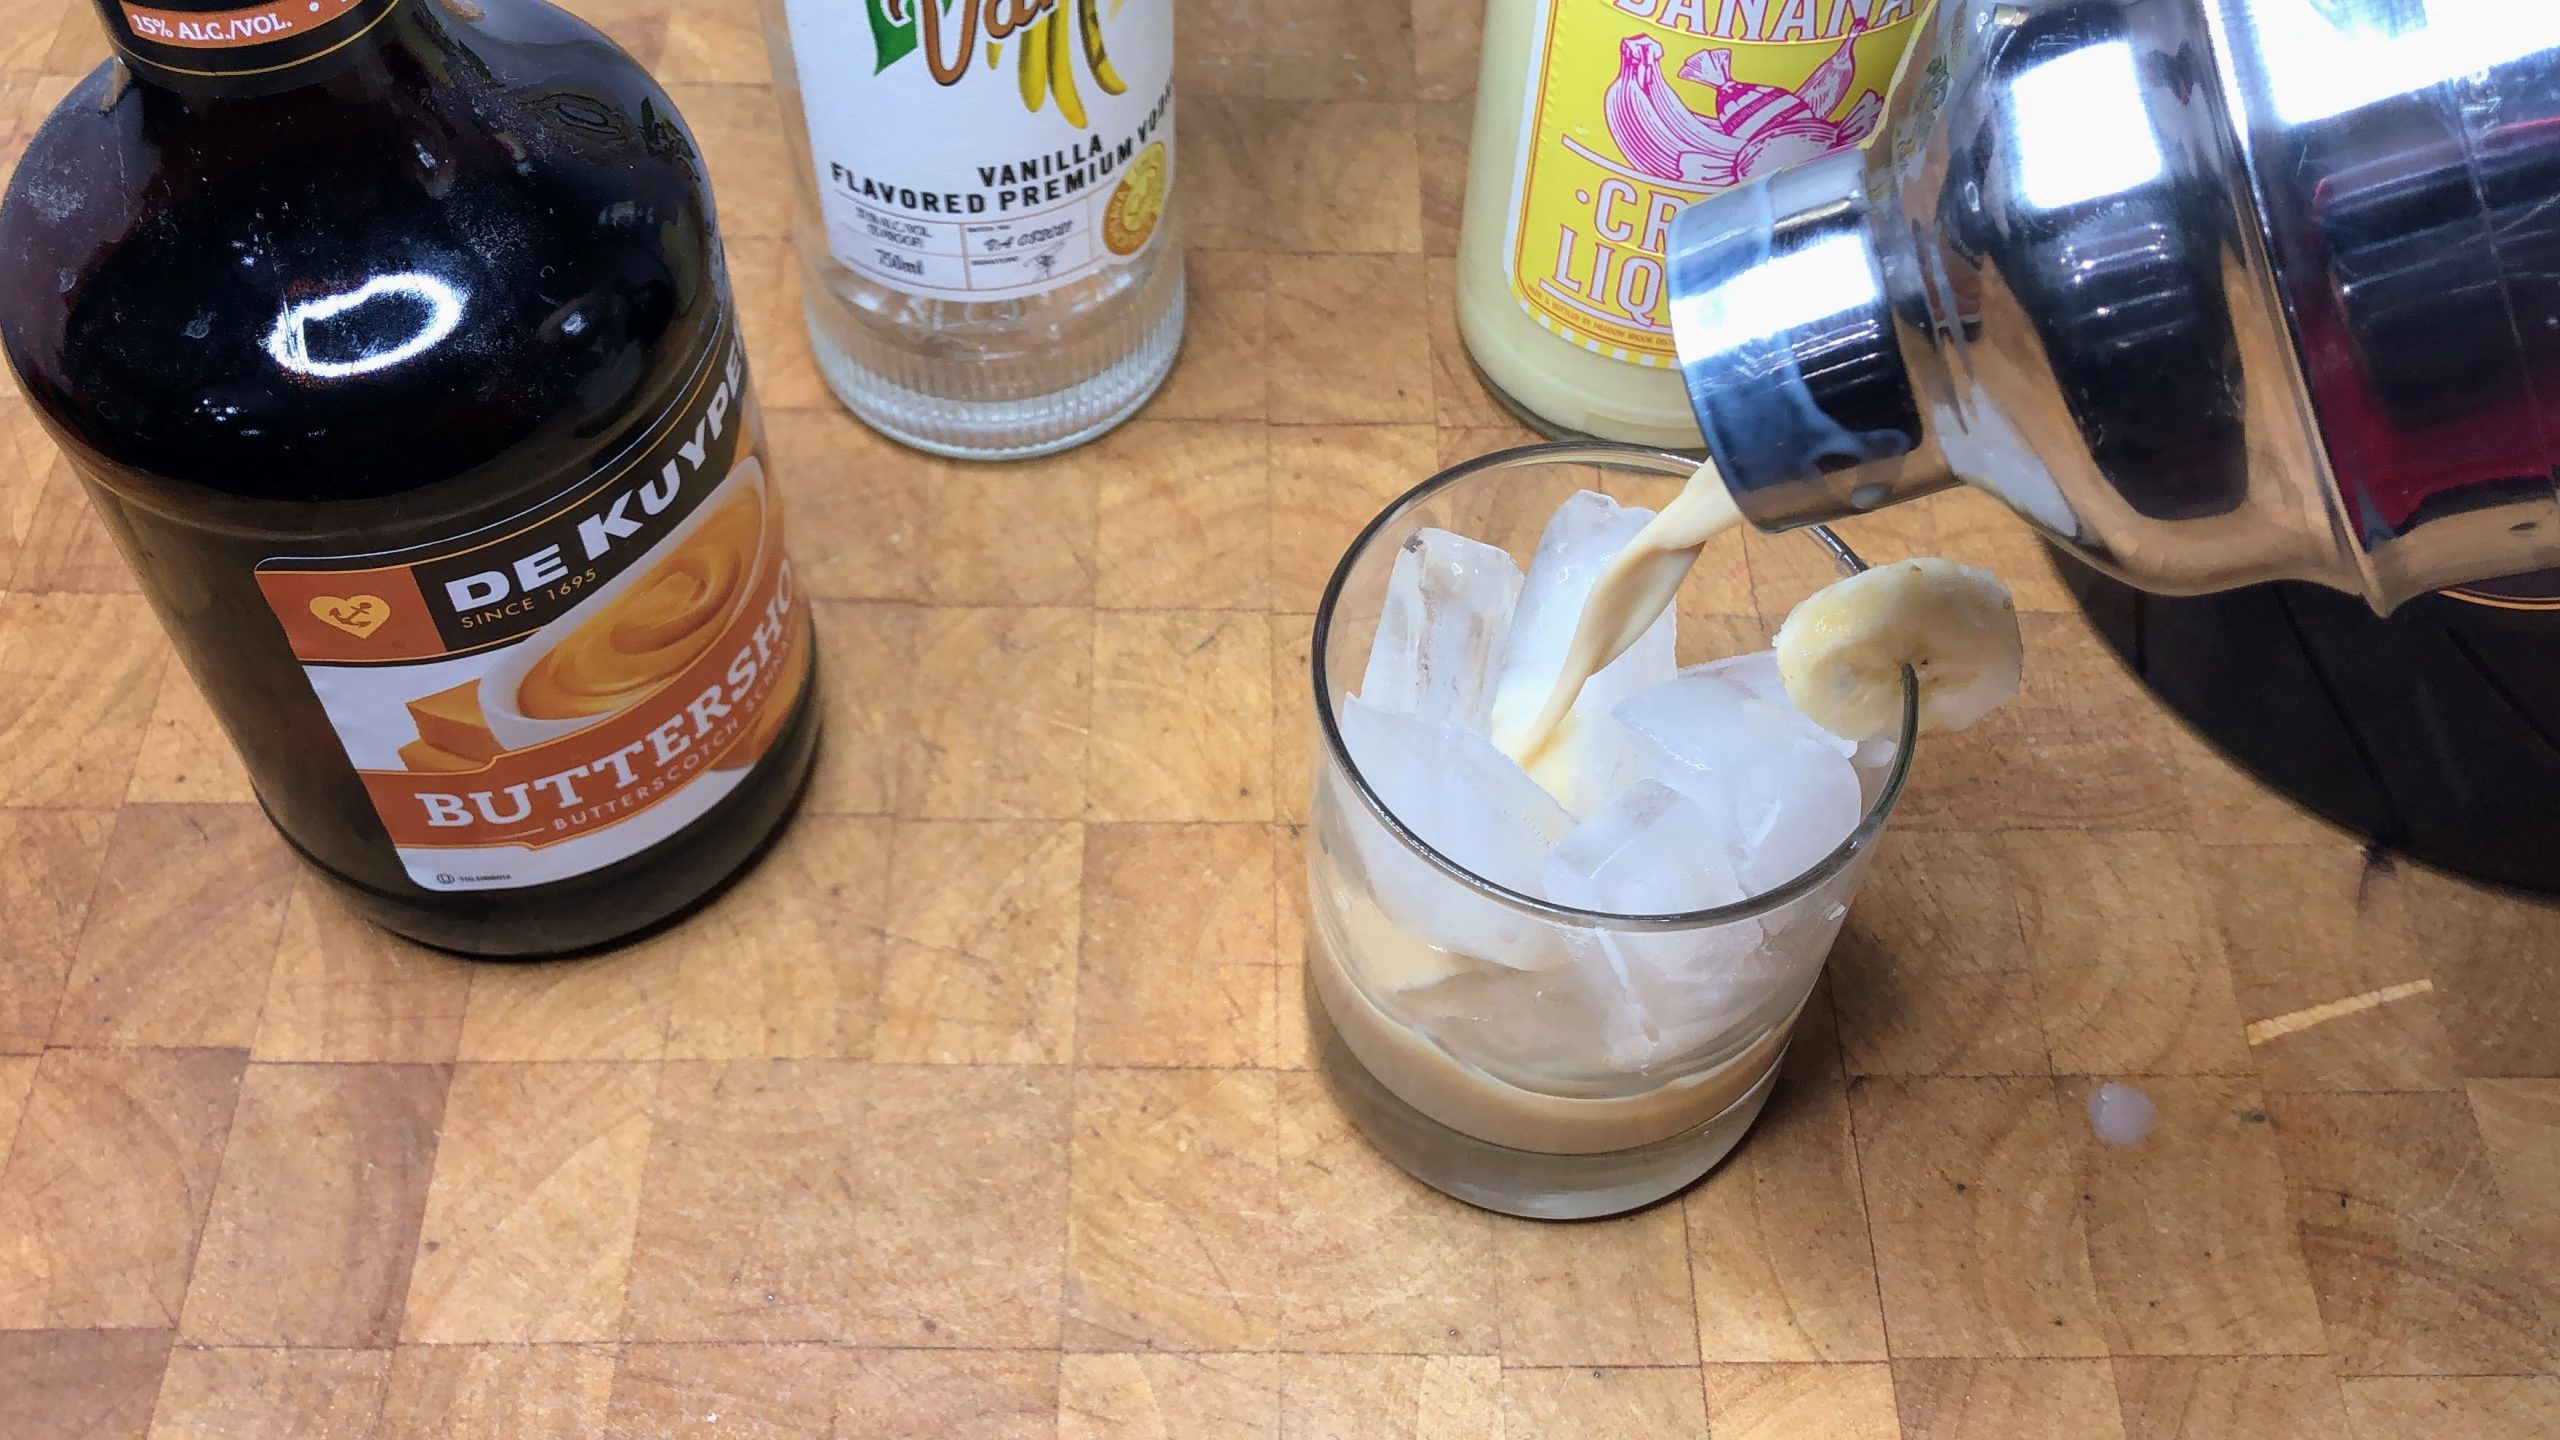 Pouring banana foster drink from shaker into a glass.